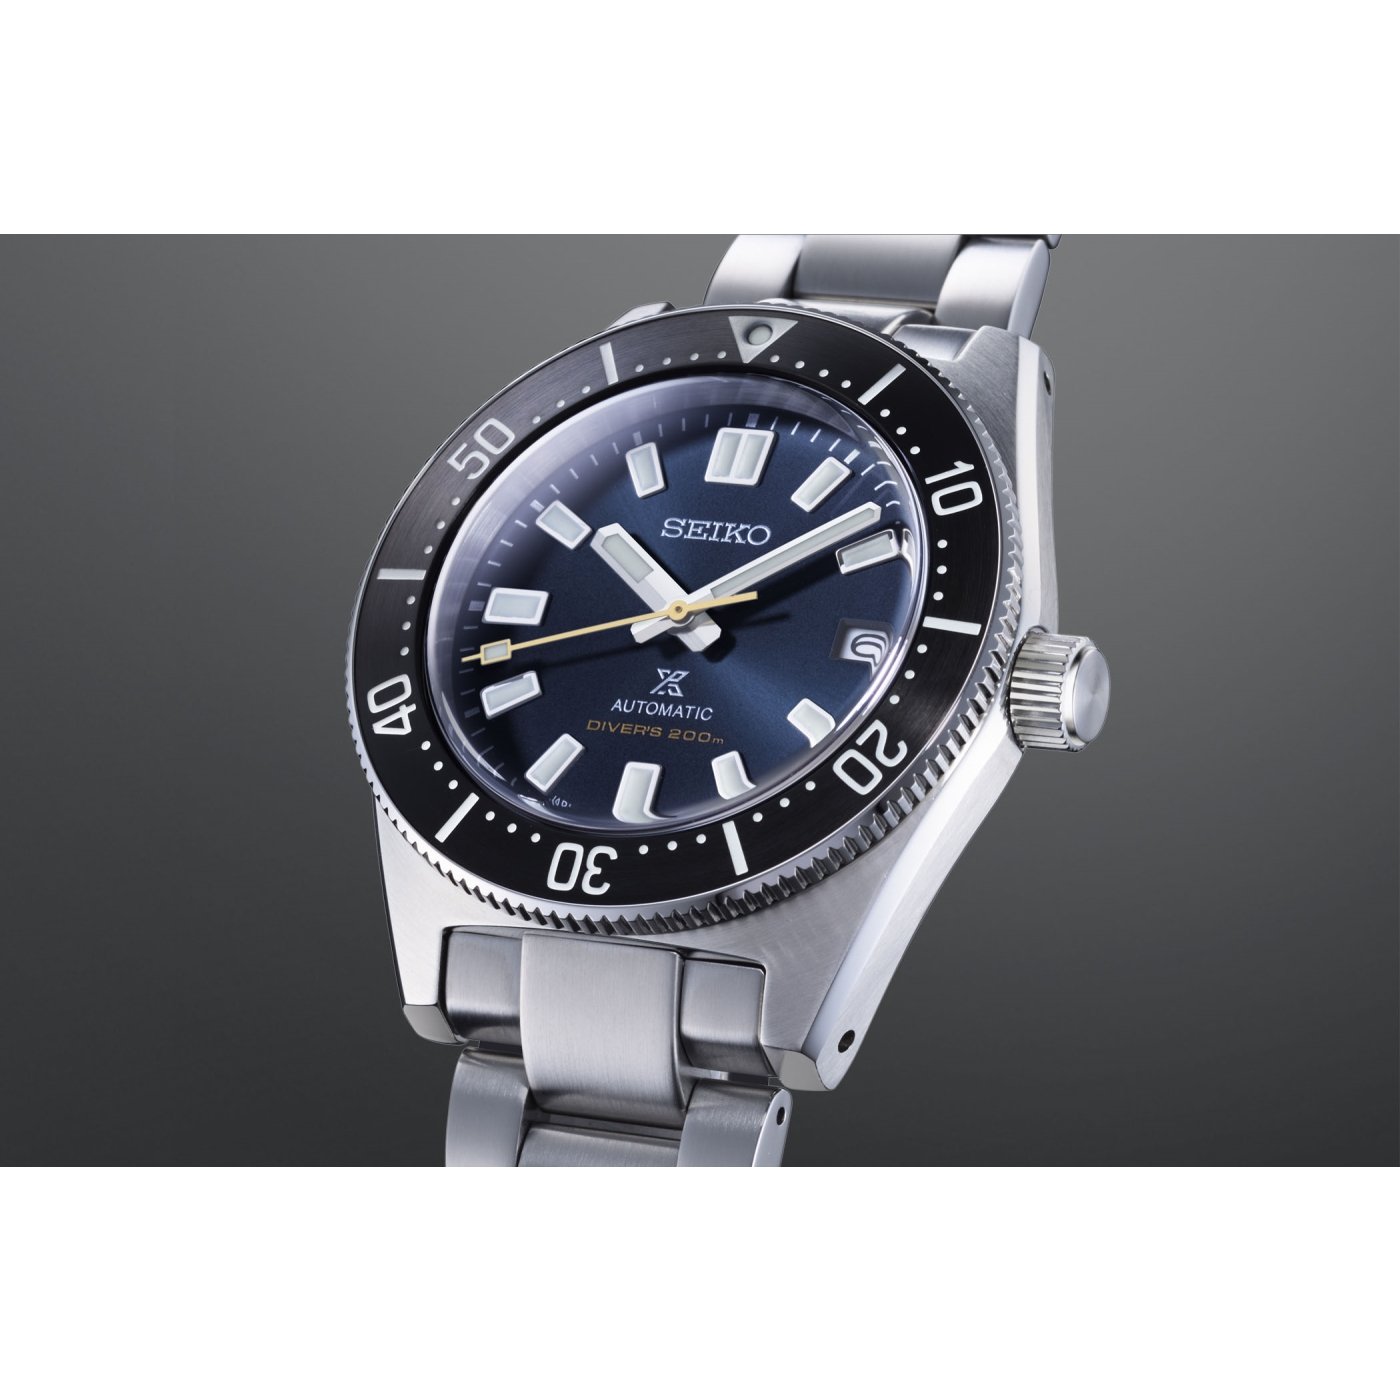 christopher ward - Toolwatch pour ménager ma speed ! SPB149J1-2